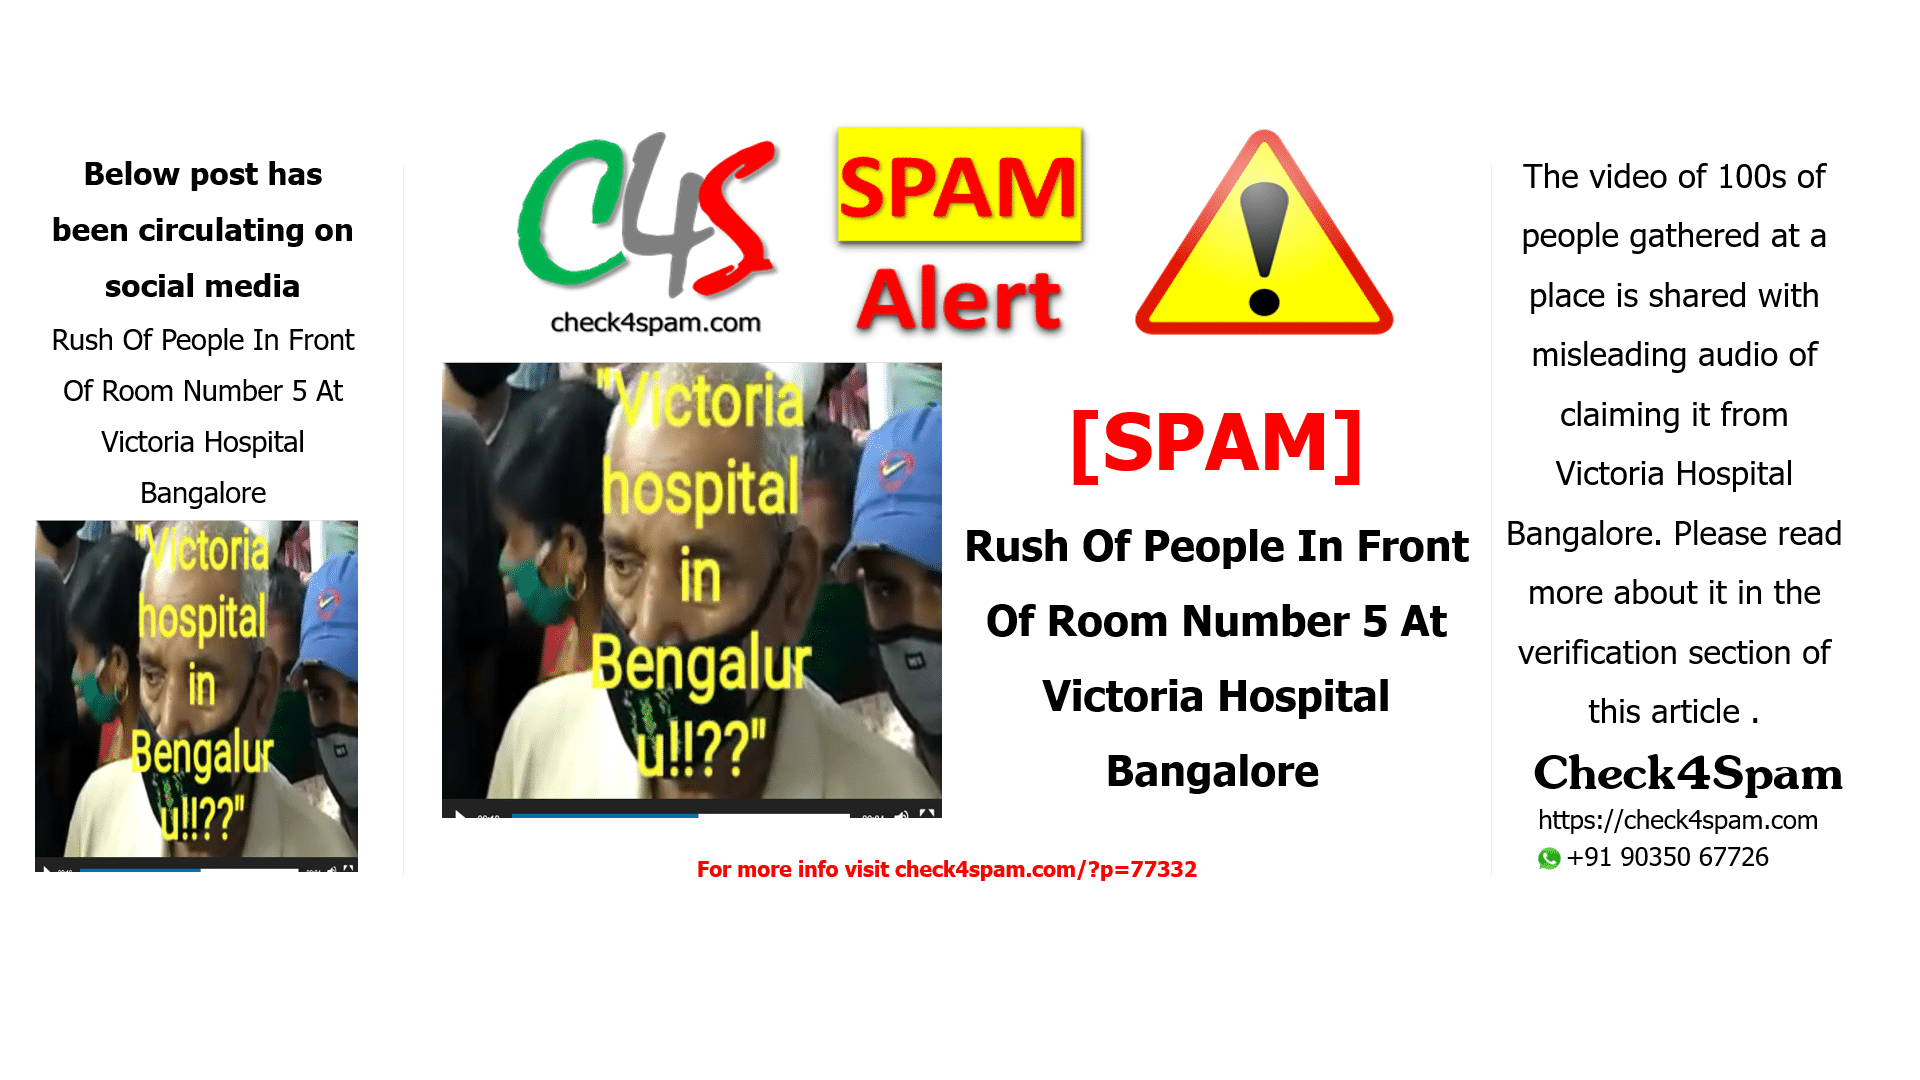 Rush Of People In Front Of Room Number 5 At Victoria Hospital Bangalore